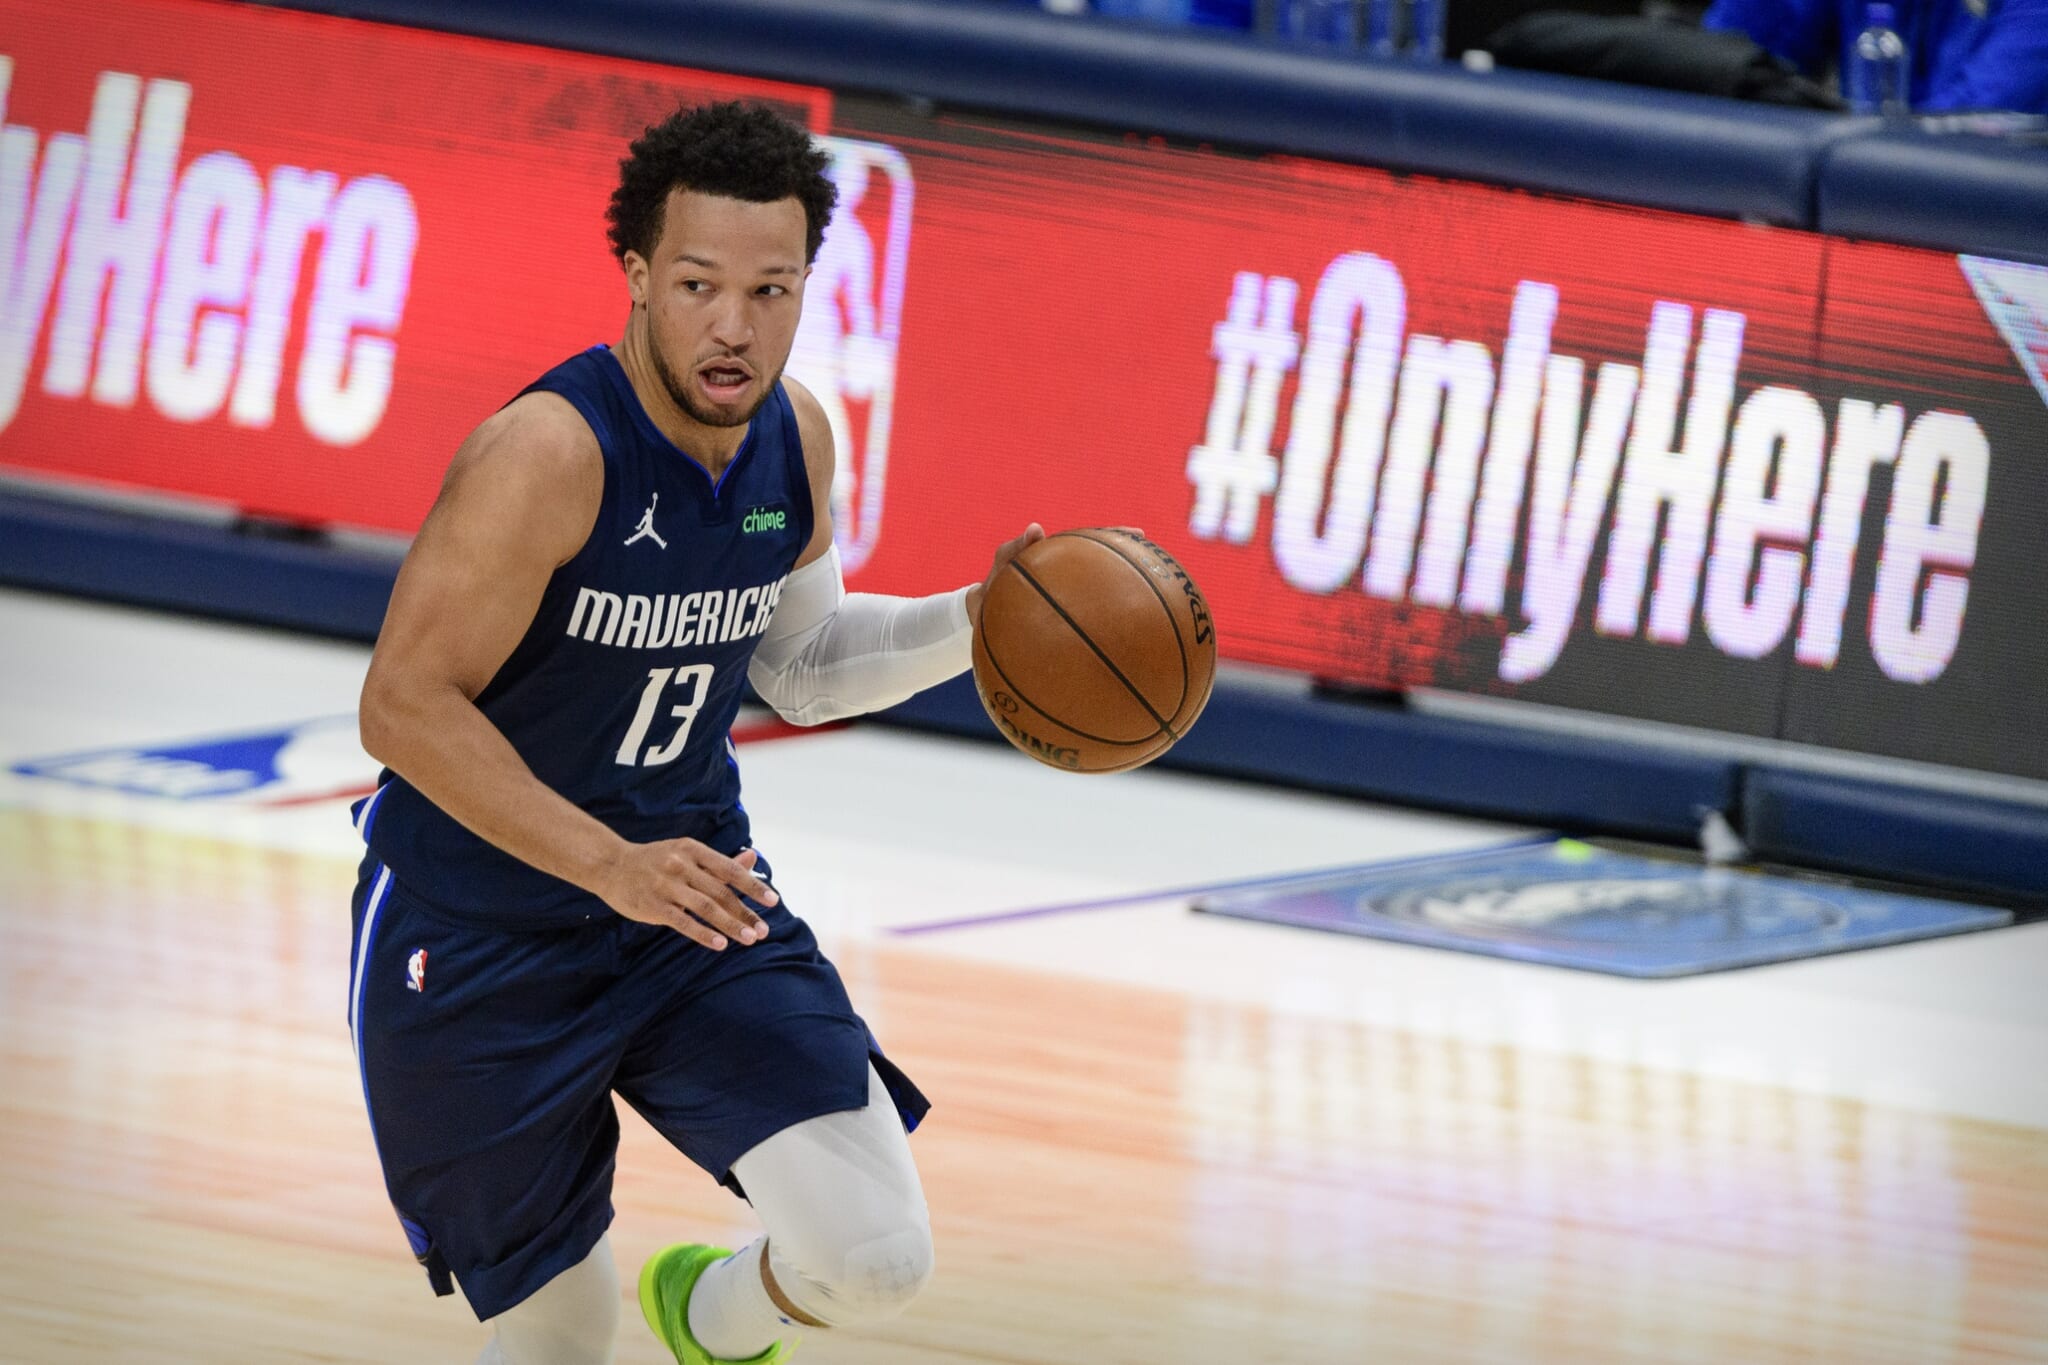 Why Jalen Brunson should win Sixth Man of the Year